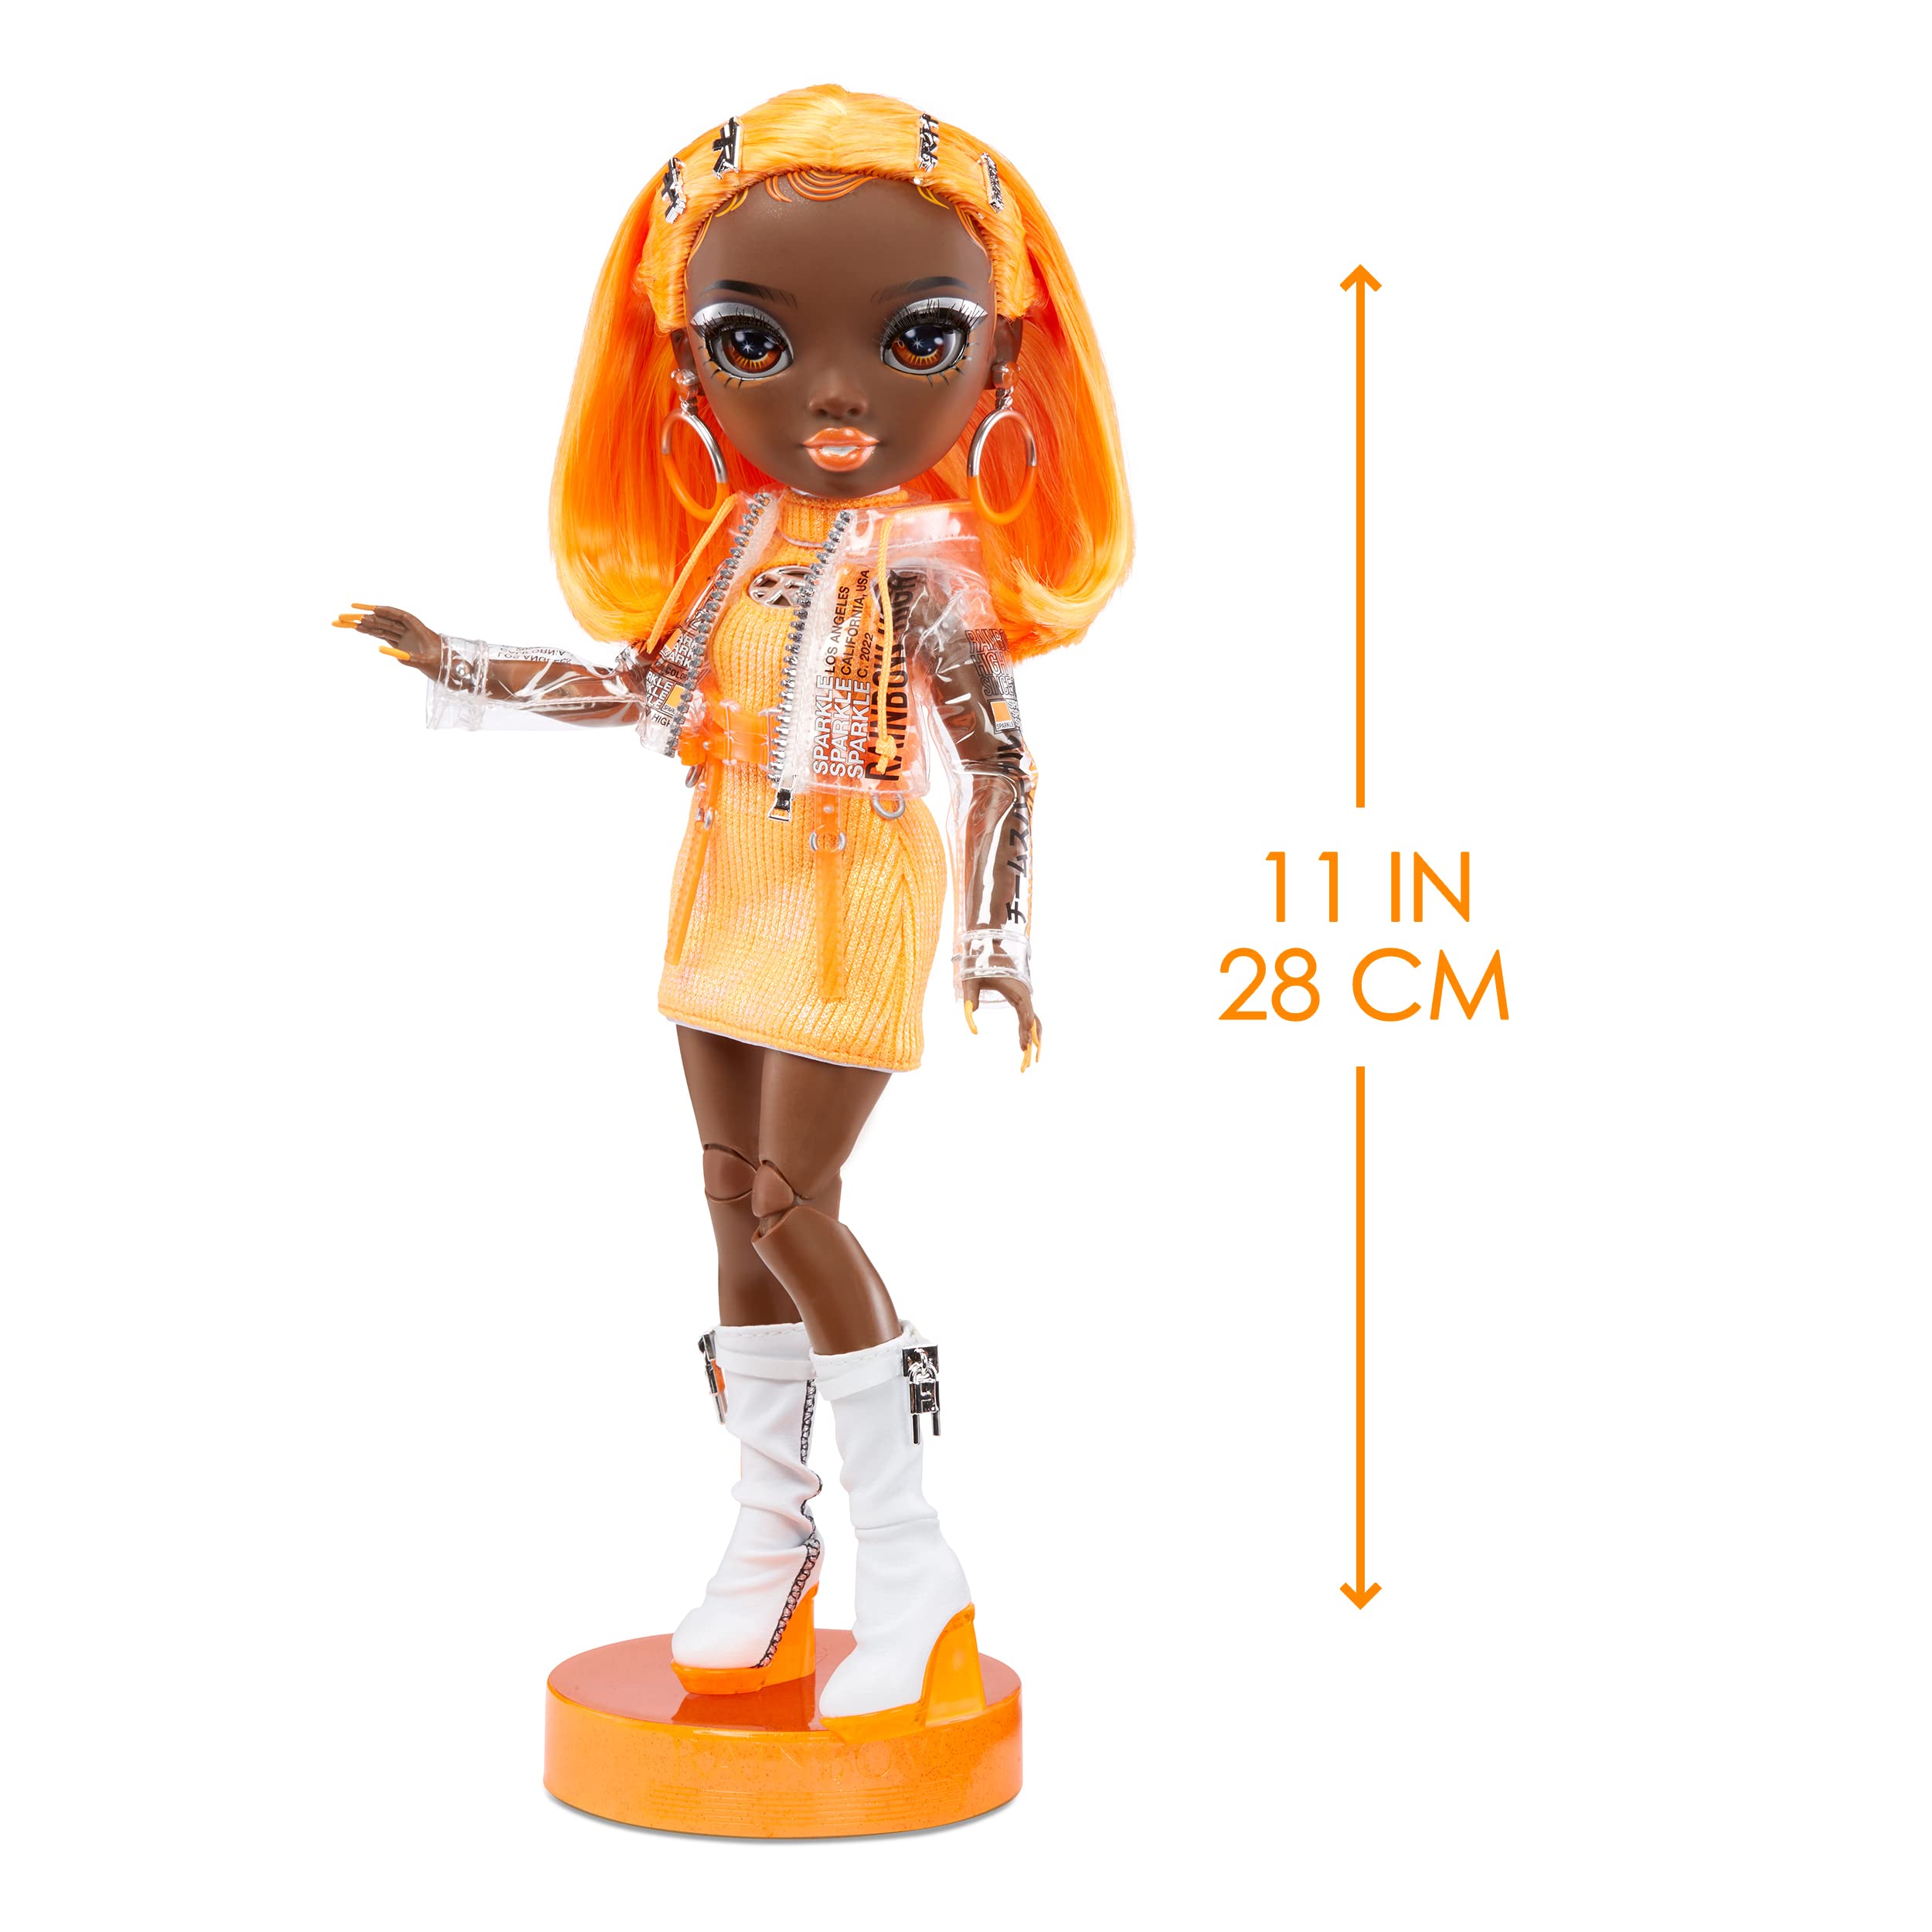 Rainbow High Michelle- Orange Fashion Doll. Fashionable Outfit & 10+ Colorful Play Accessories. Great Gift for Kids 4-12 Years Old and Collectors.